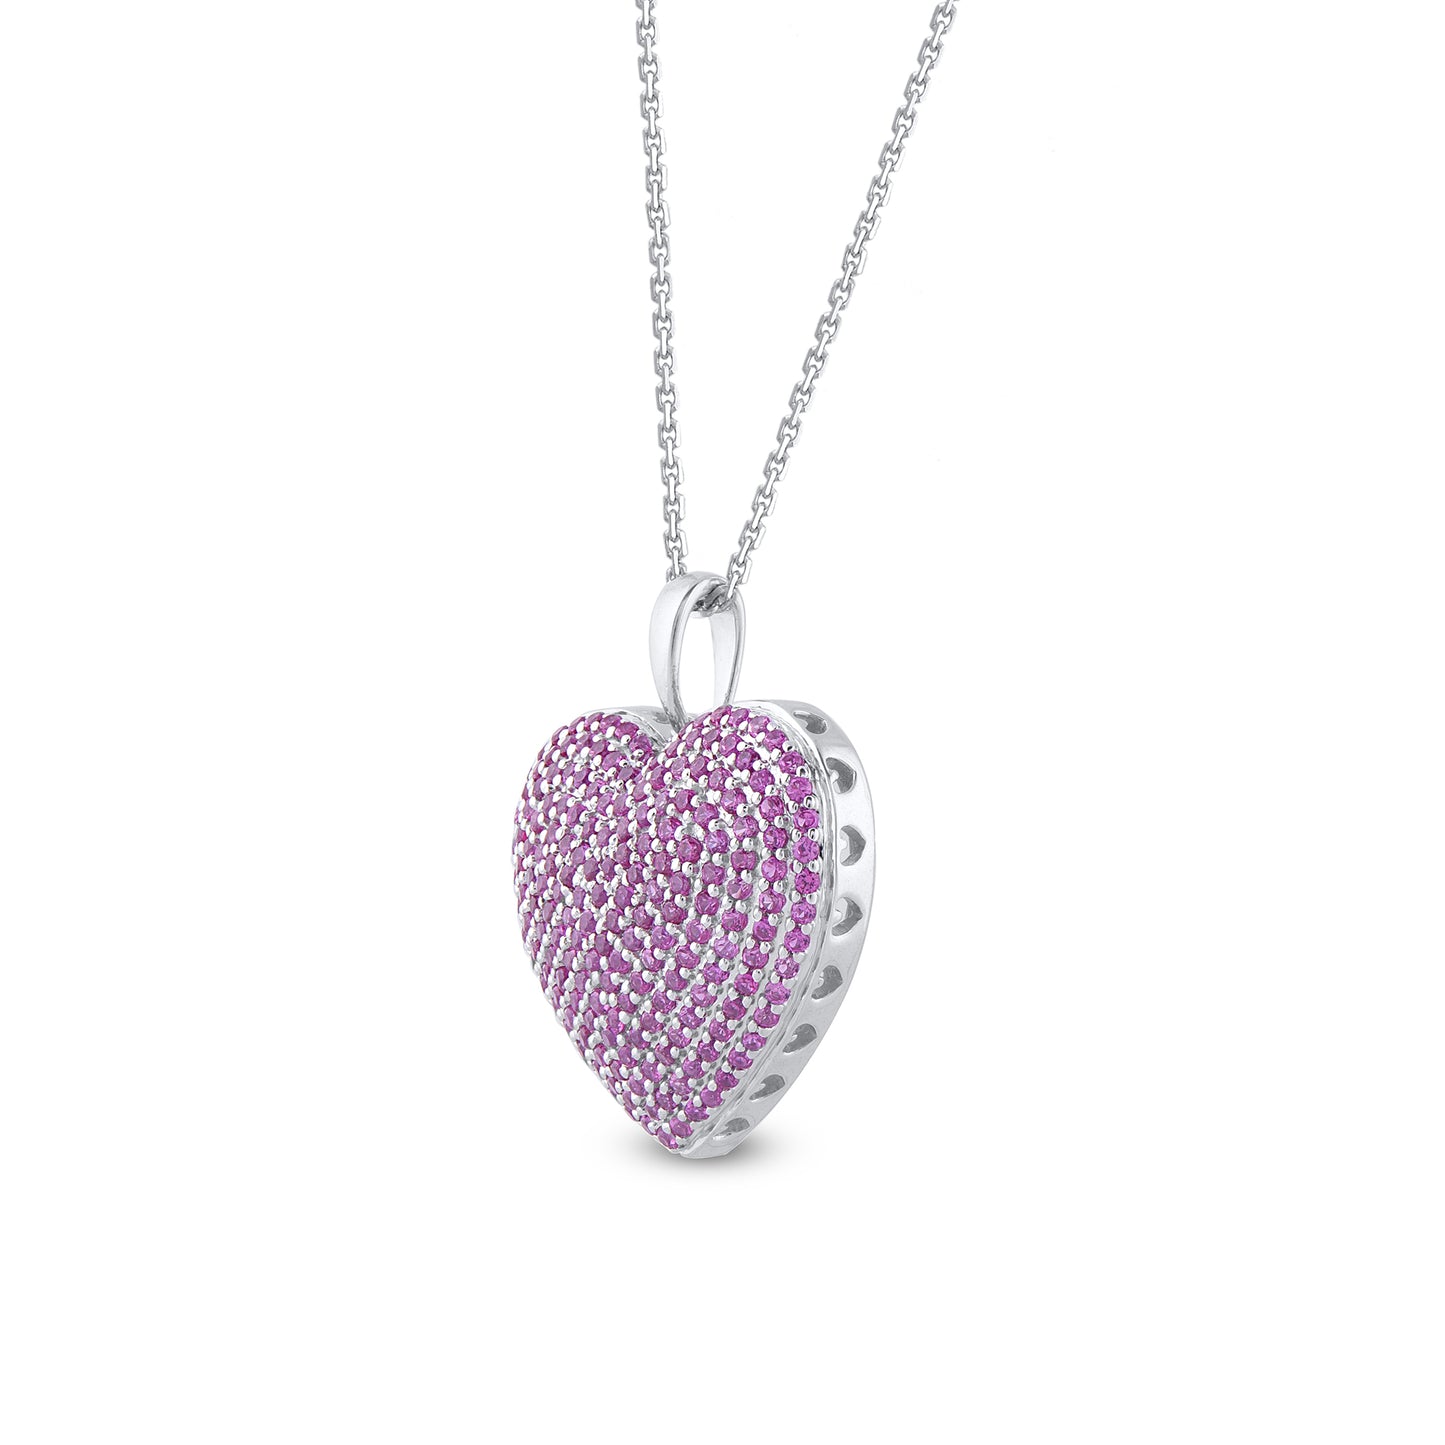 Pink Sapphire Heart Pendant Necklace in 925 Sterling